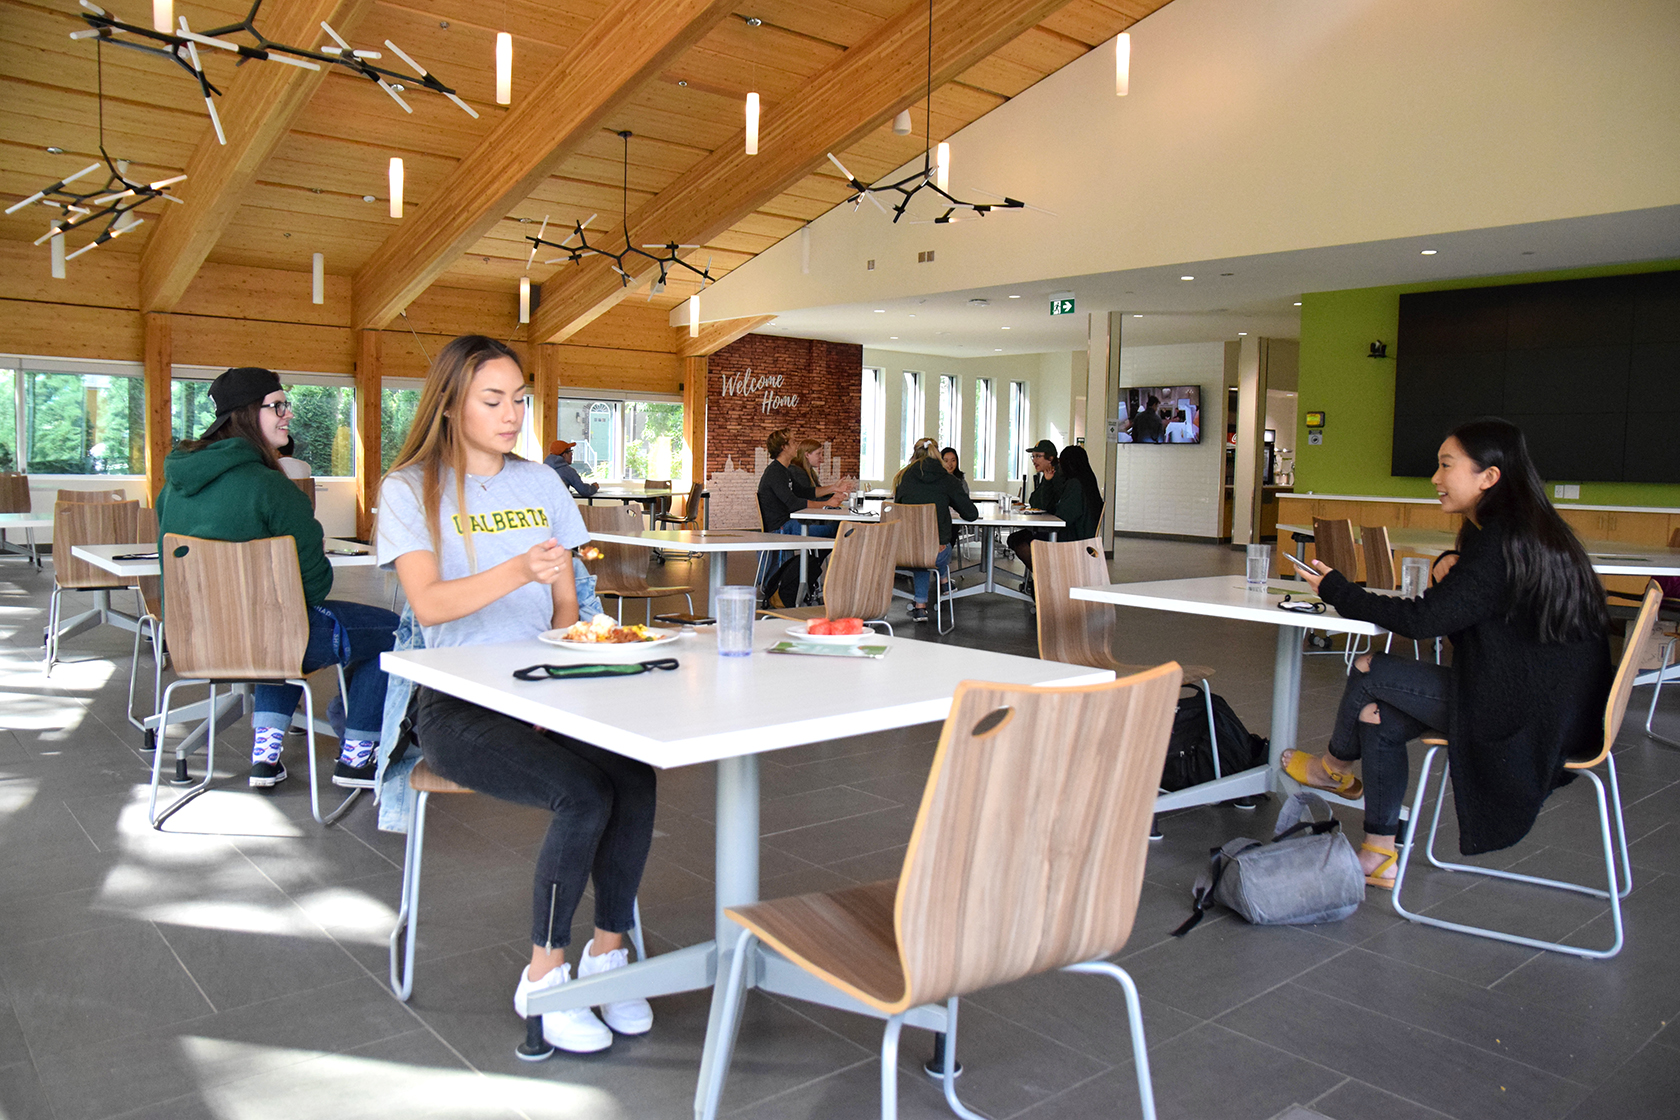 Students eating in residence dining hall during COVID